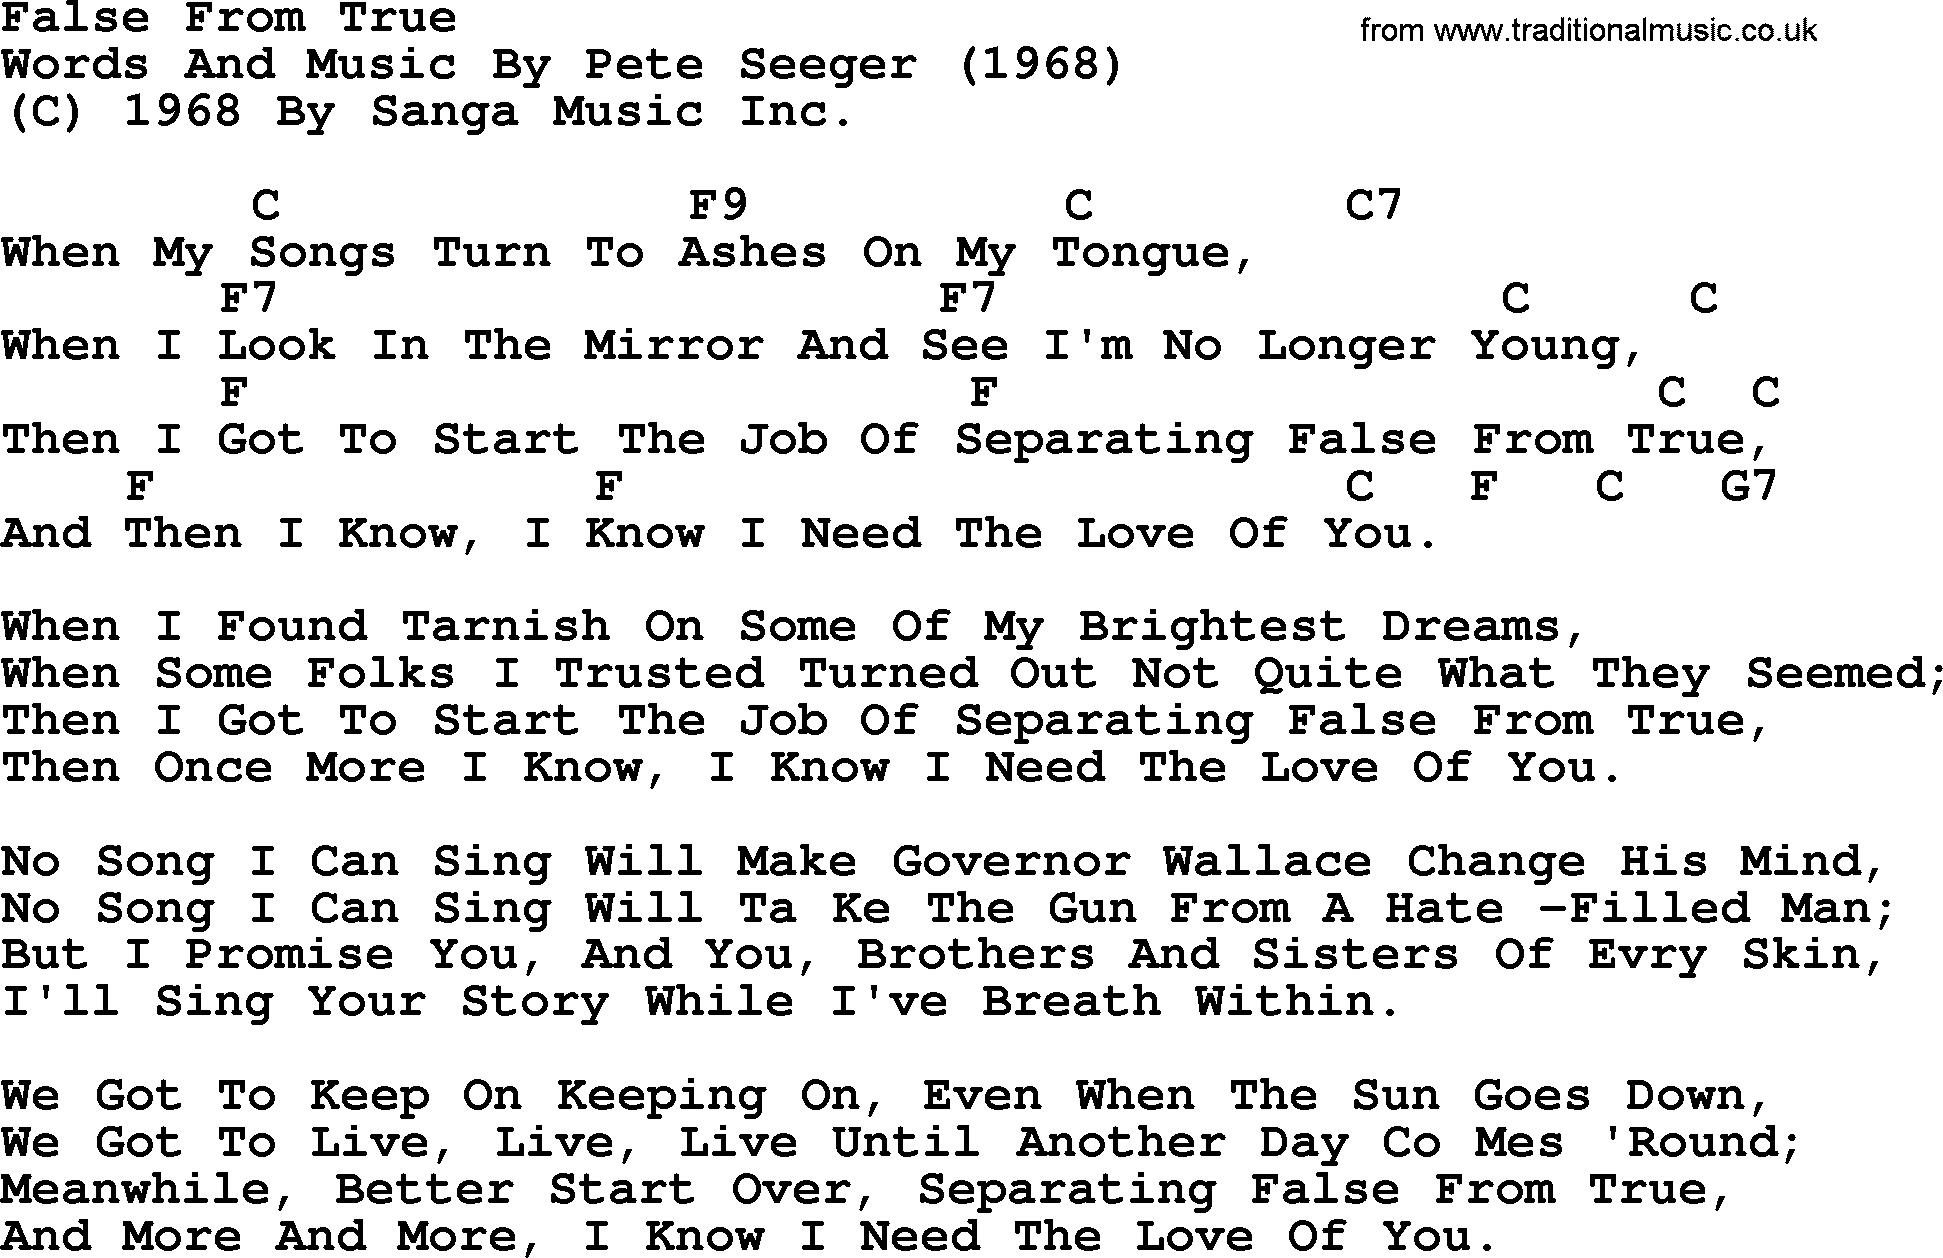 Pete Seeger song False From True, lyrics and chords